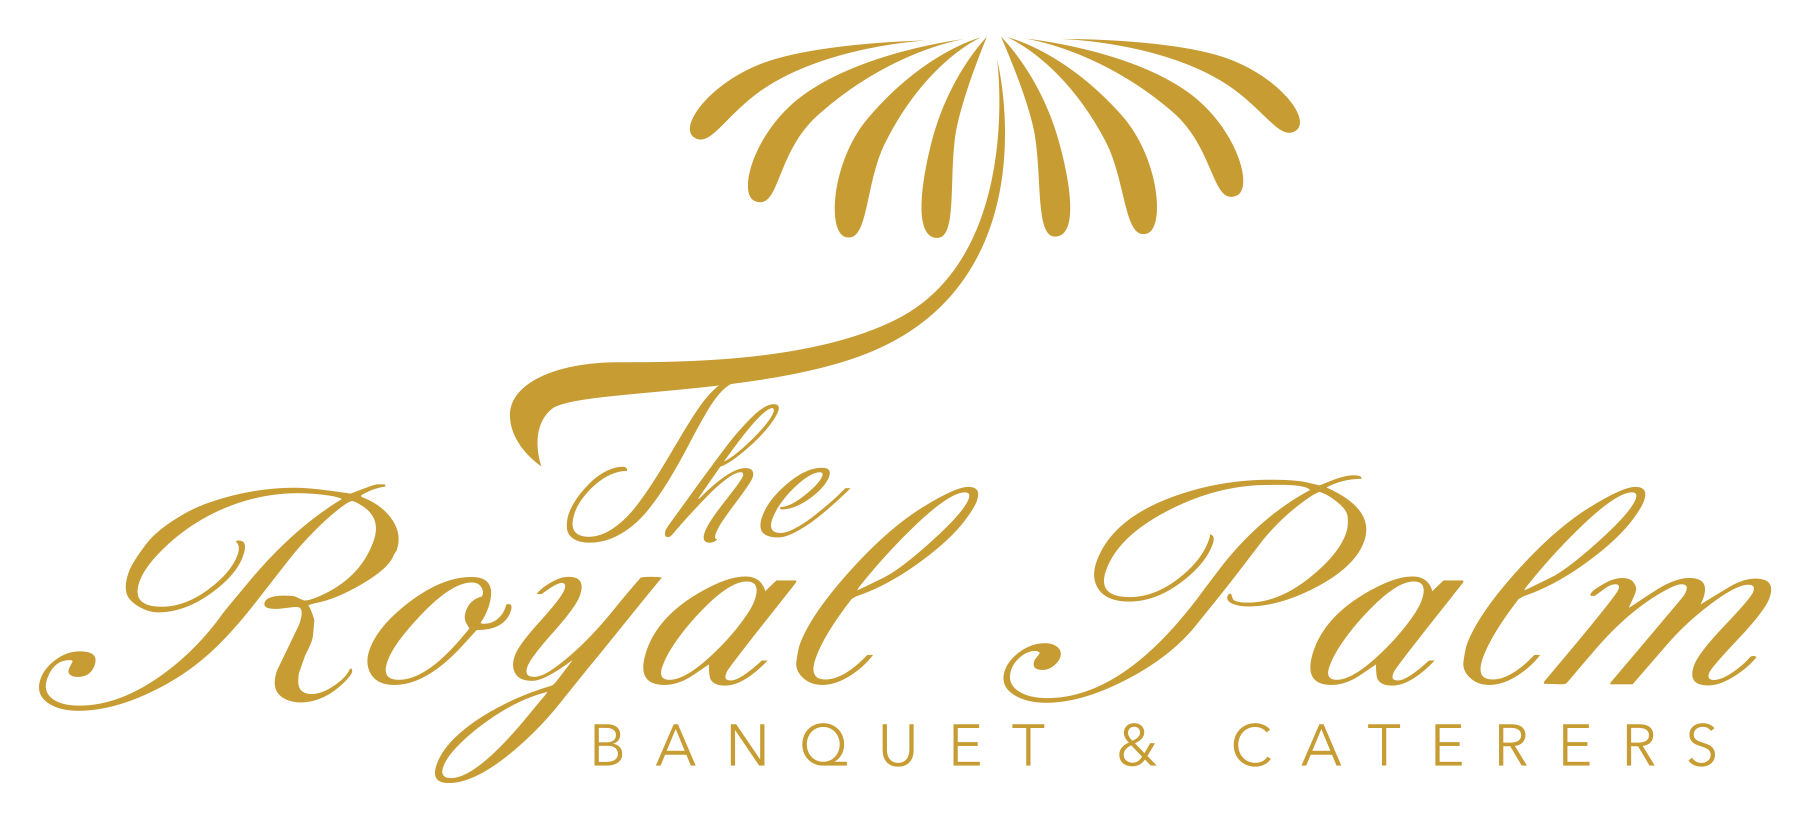 Elegant Royal Palm Hall & Catering Services